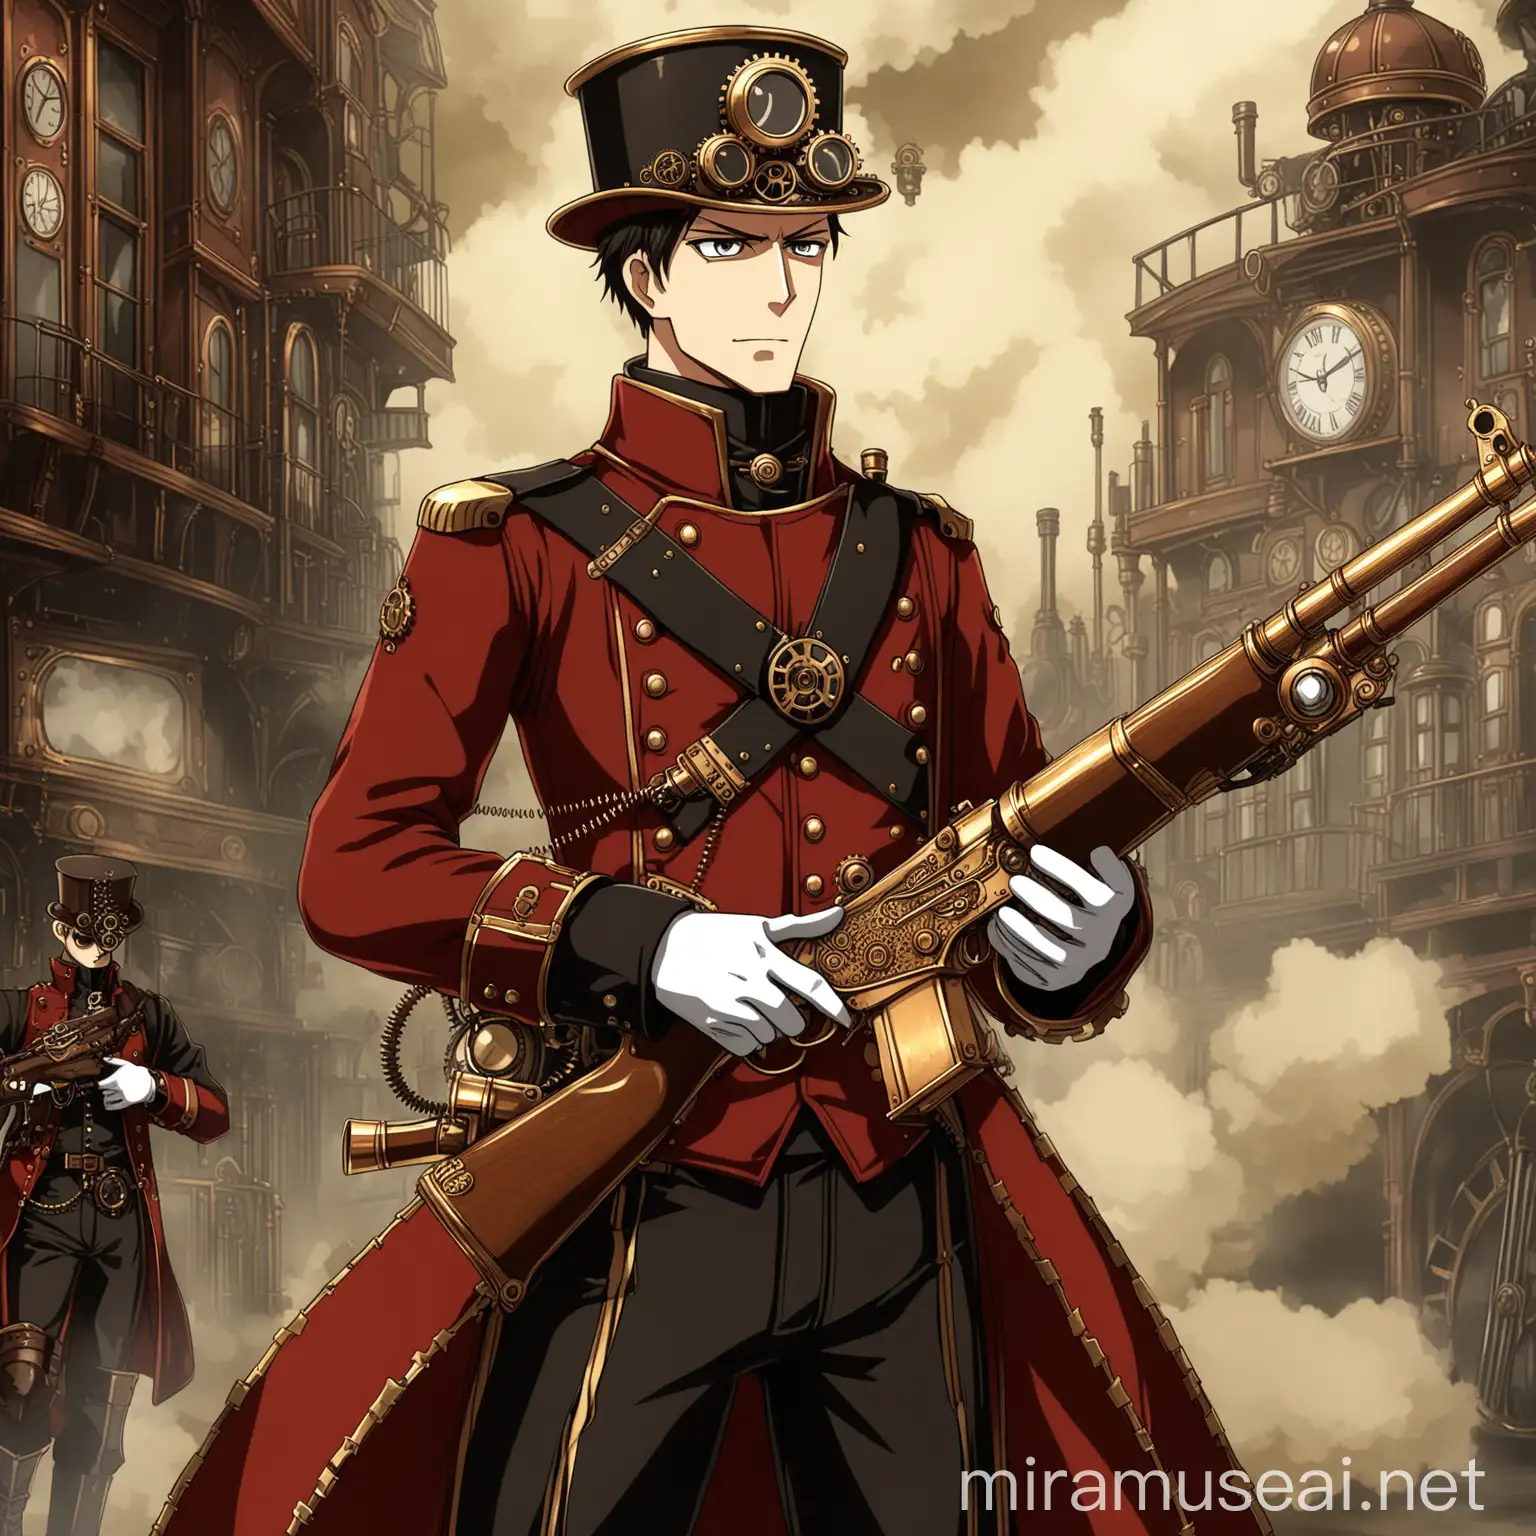 Steampunk Soldier with Victorian Rifle in Anime Style